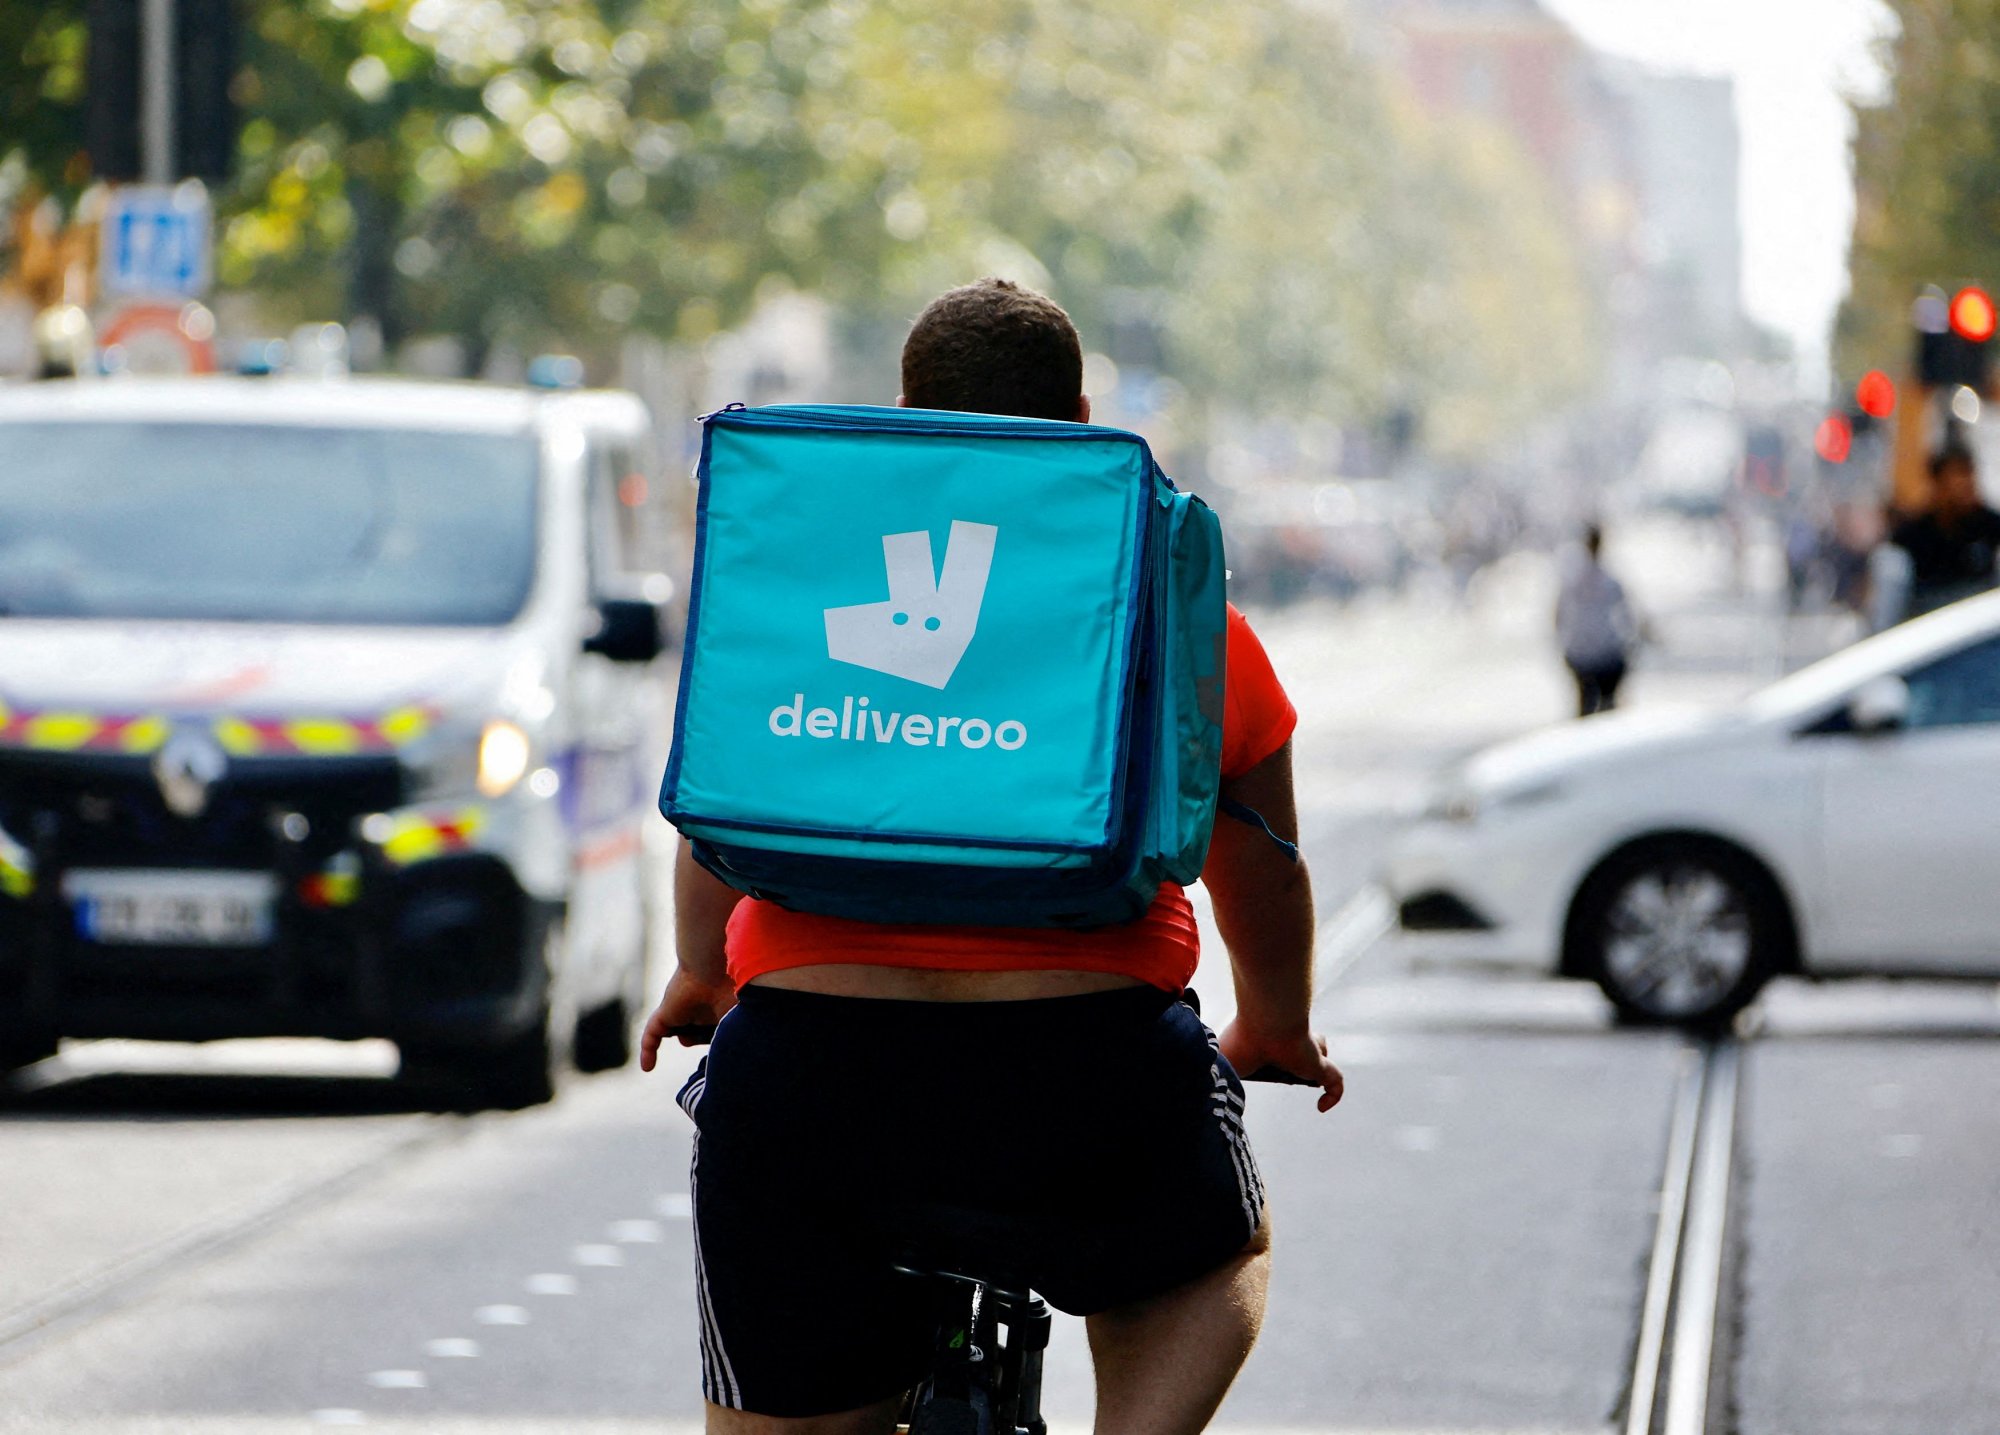 2023 11 21T112350Z 522904631 RC2B8X9XABS5 RTRMADP 5 BRITAIN COURT DELIVEROO.jpg